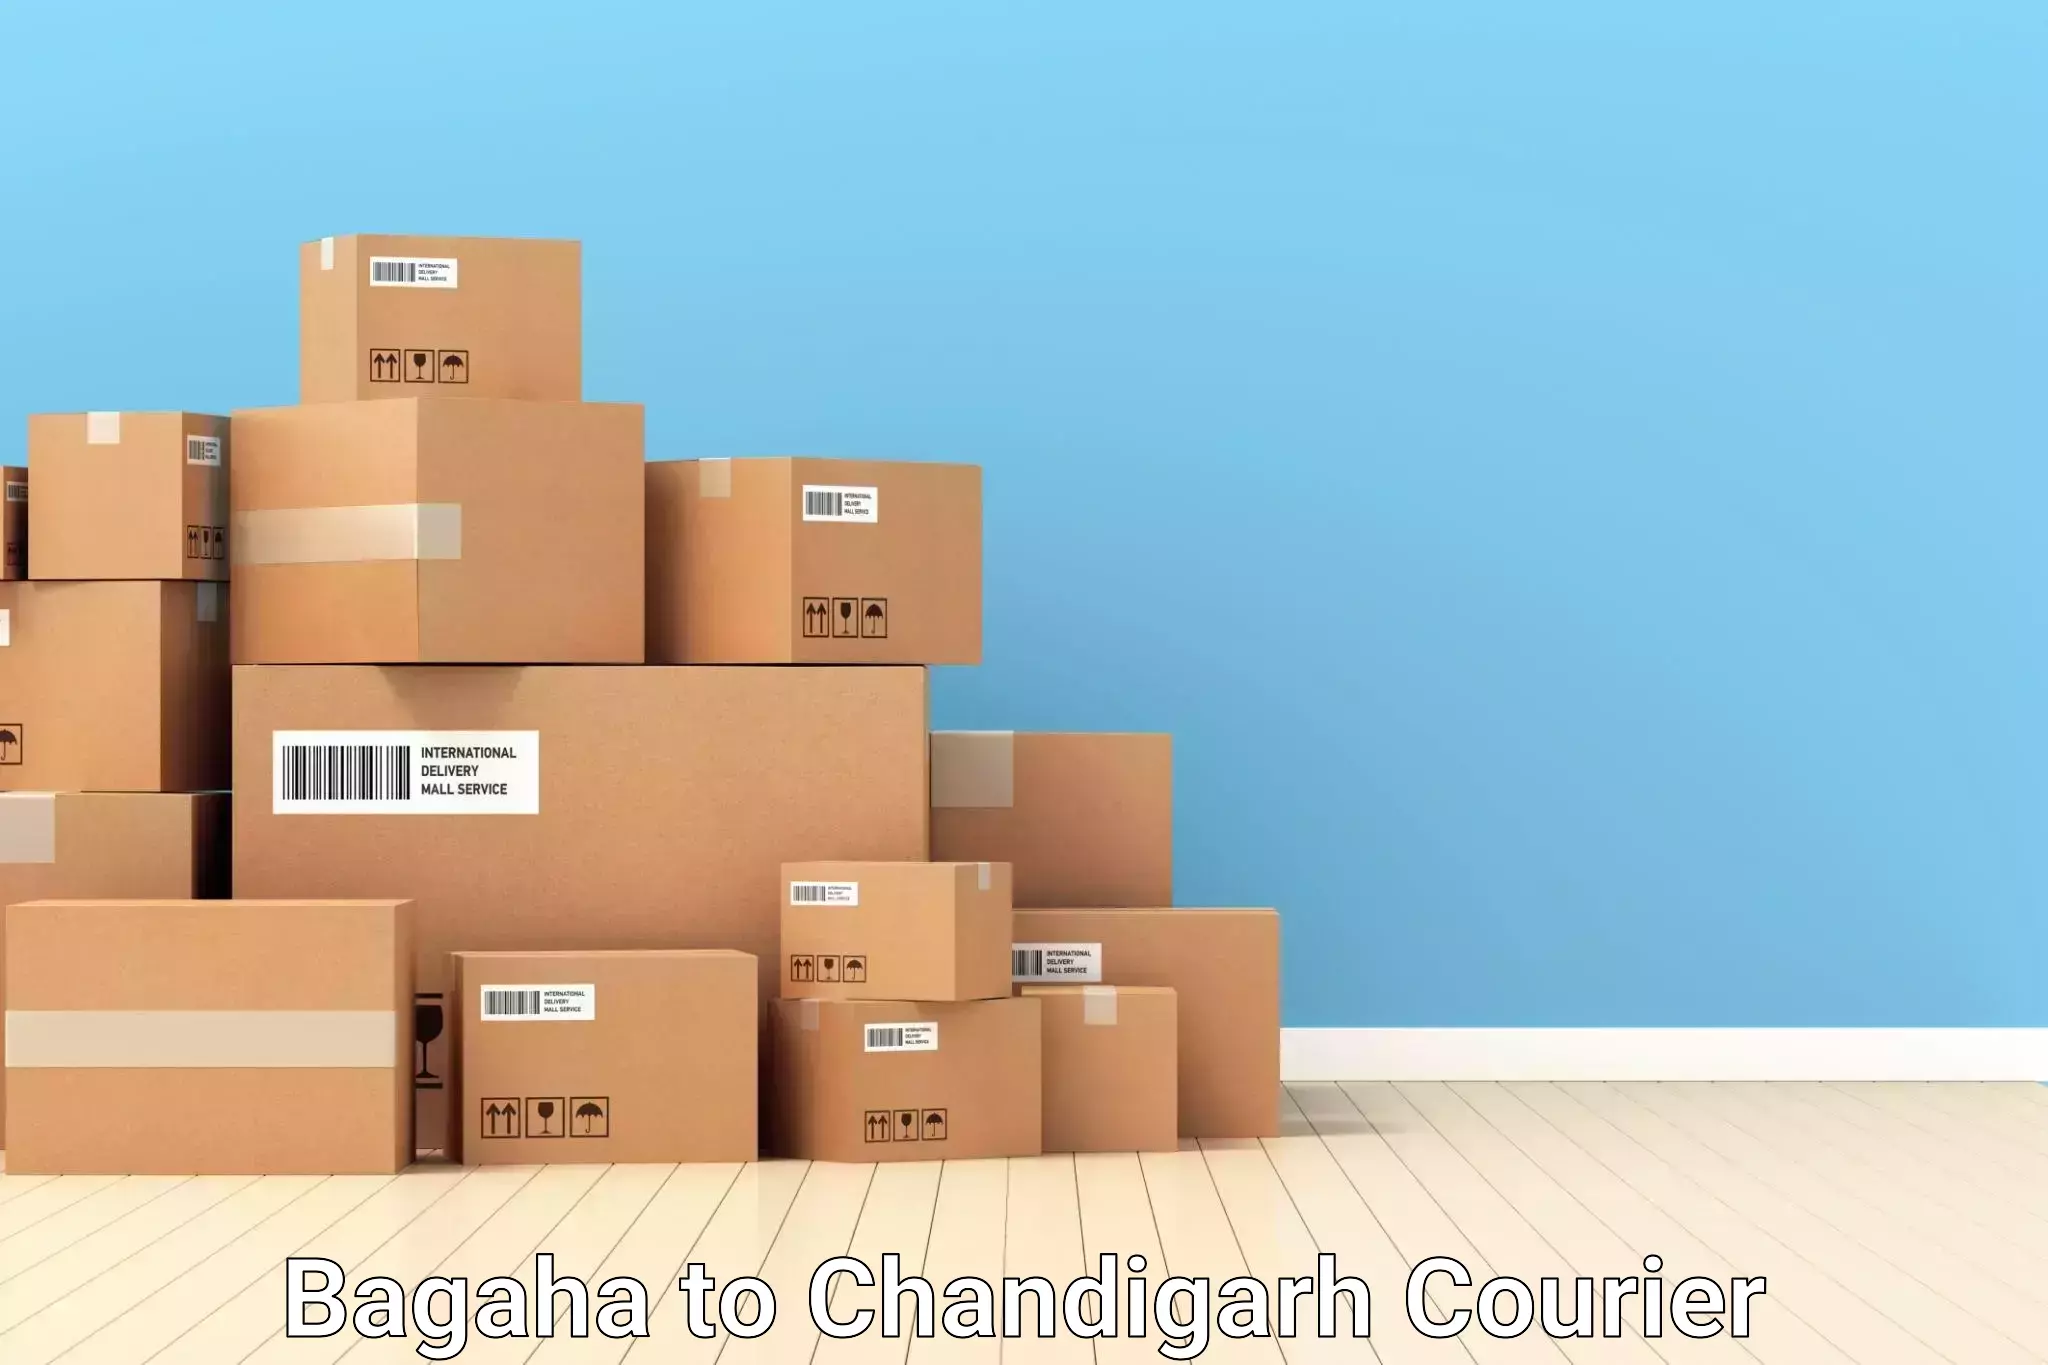 Baggage relocation service Bagaha to Chandigarh